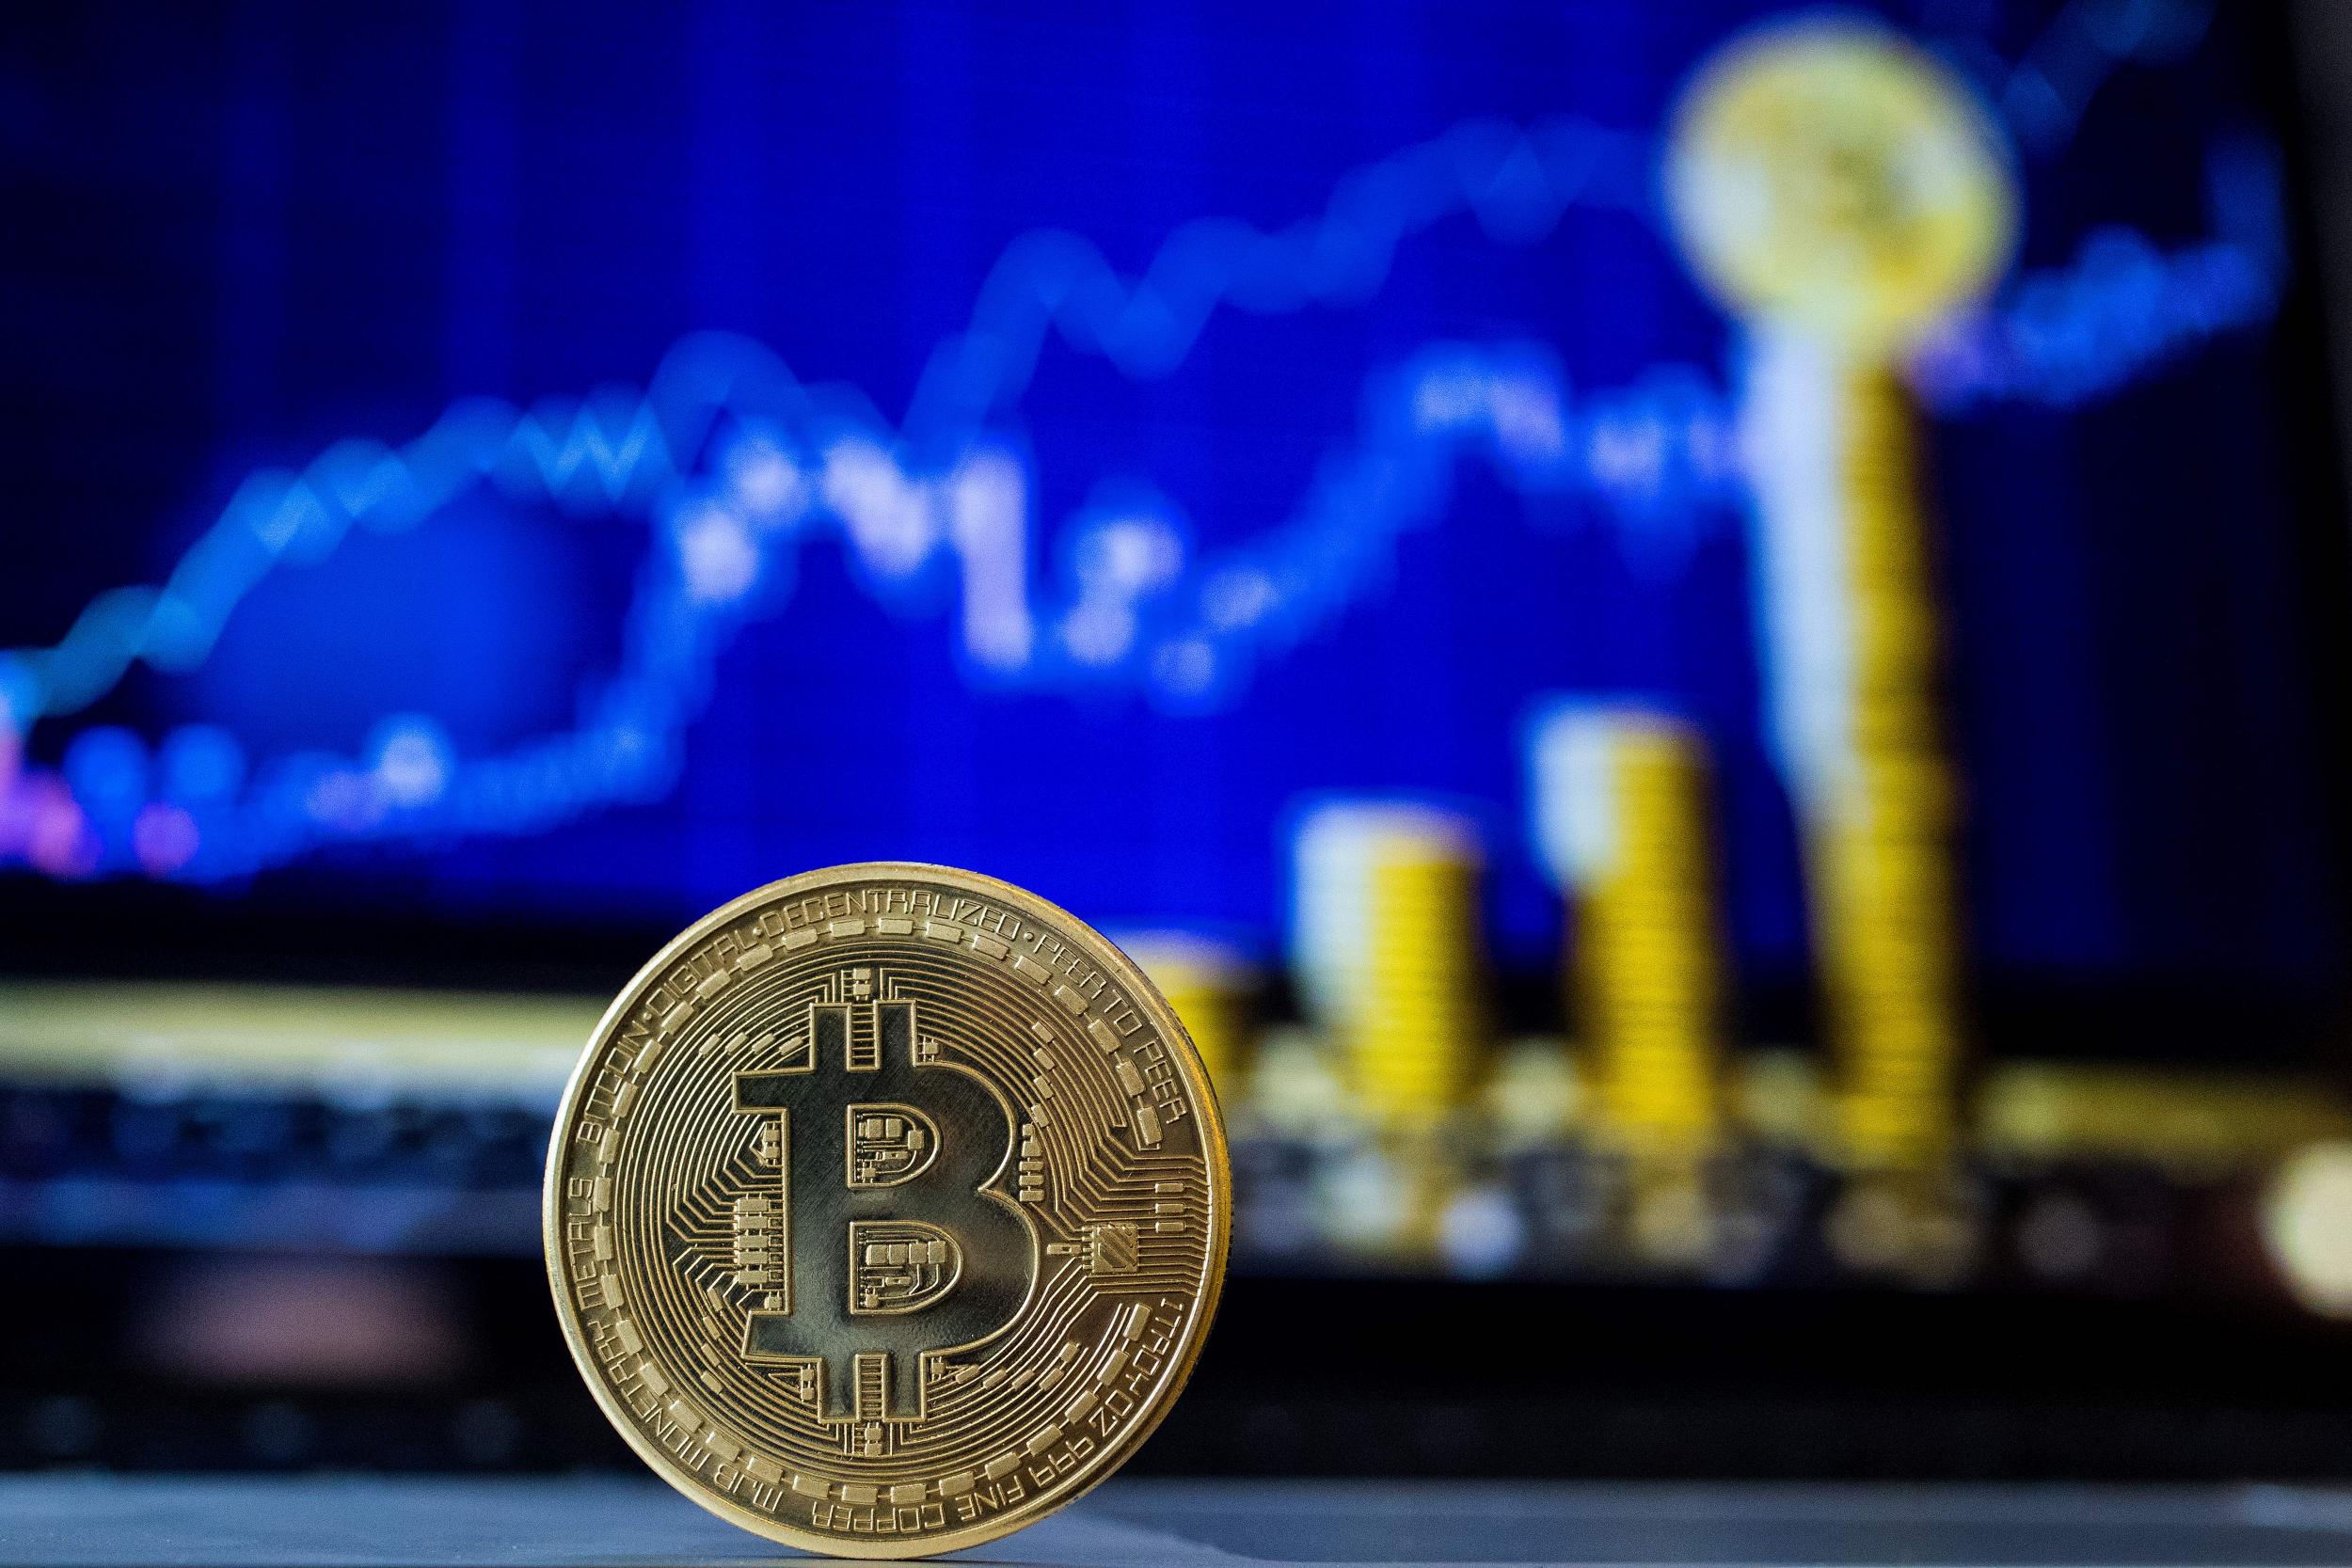 'The long-term trajectory for cryptocurrencies is upward,' said&nbsp;one analyst